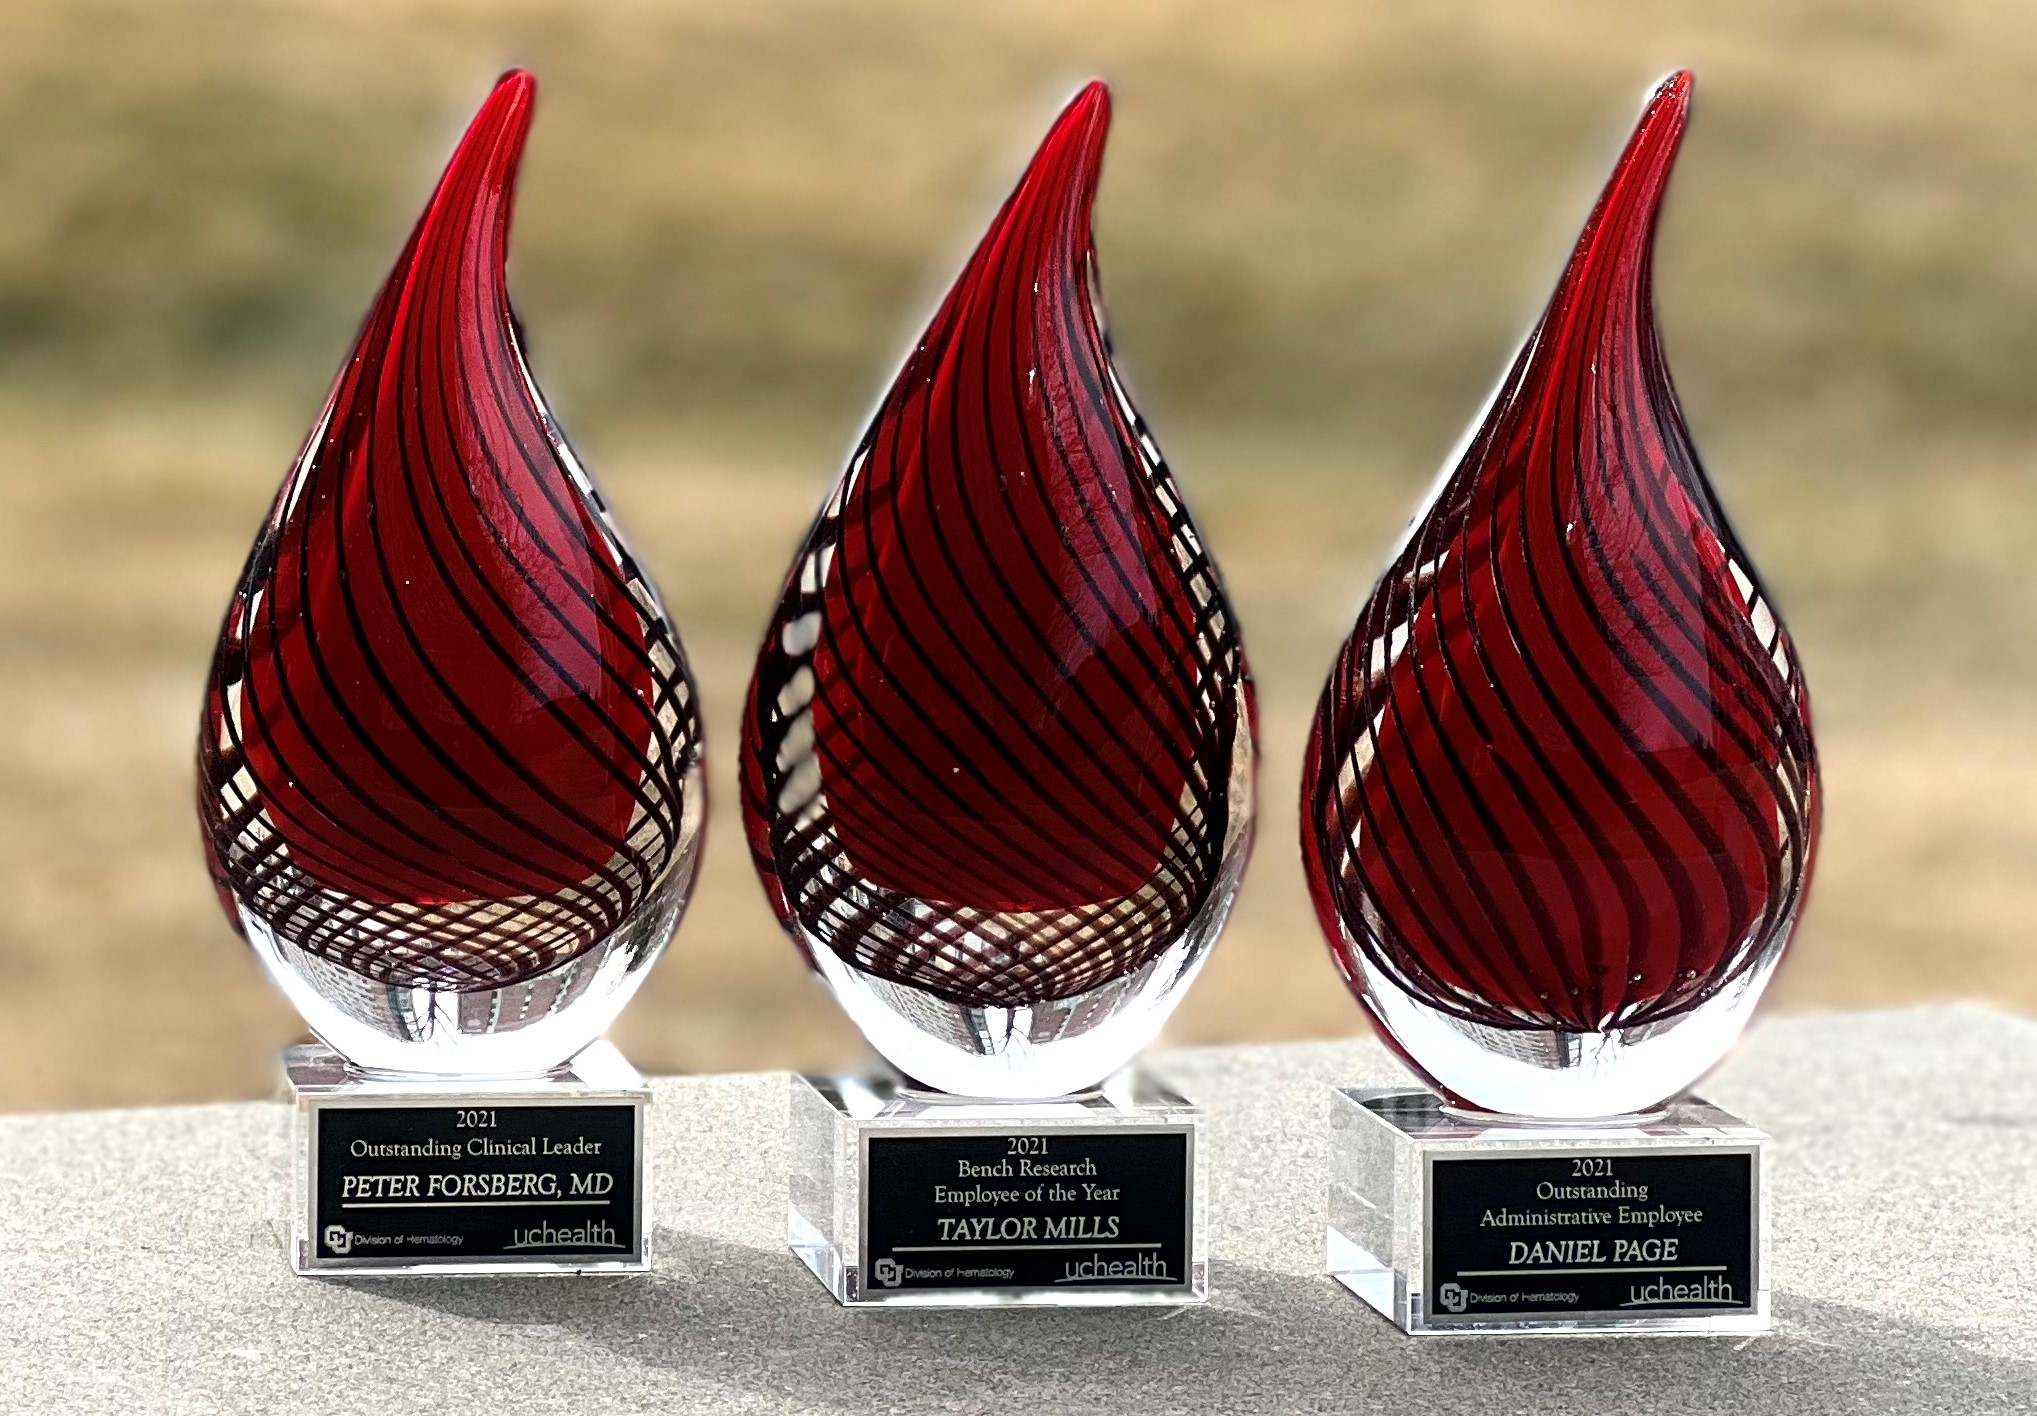 2021 Heme Year in Review Awards